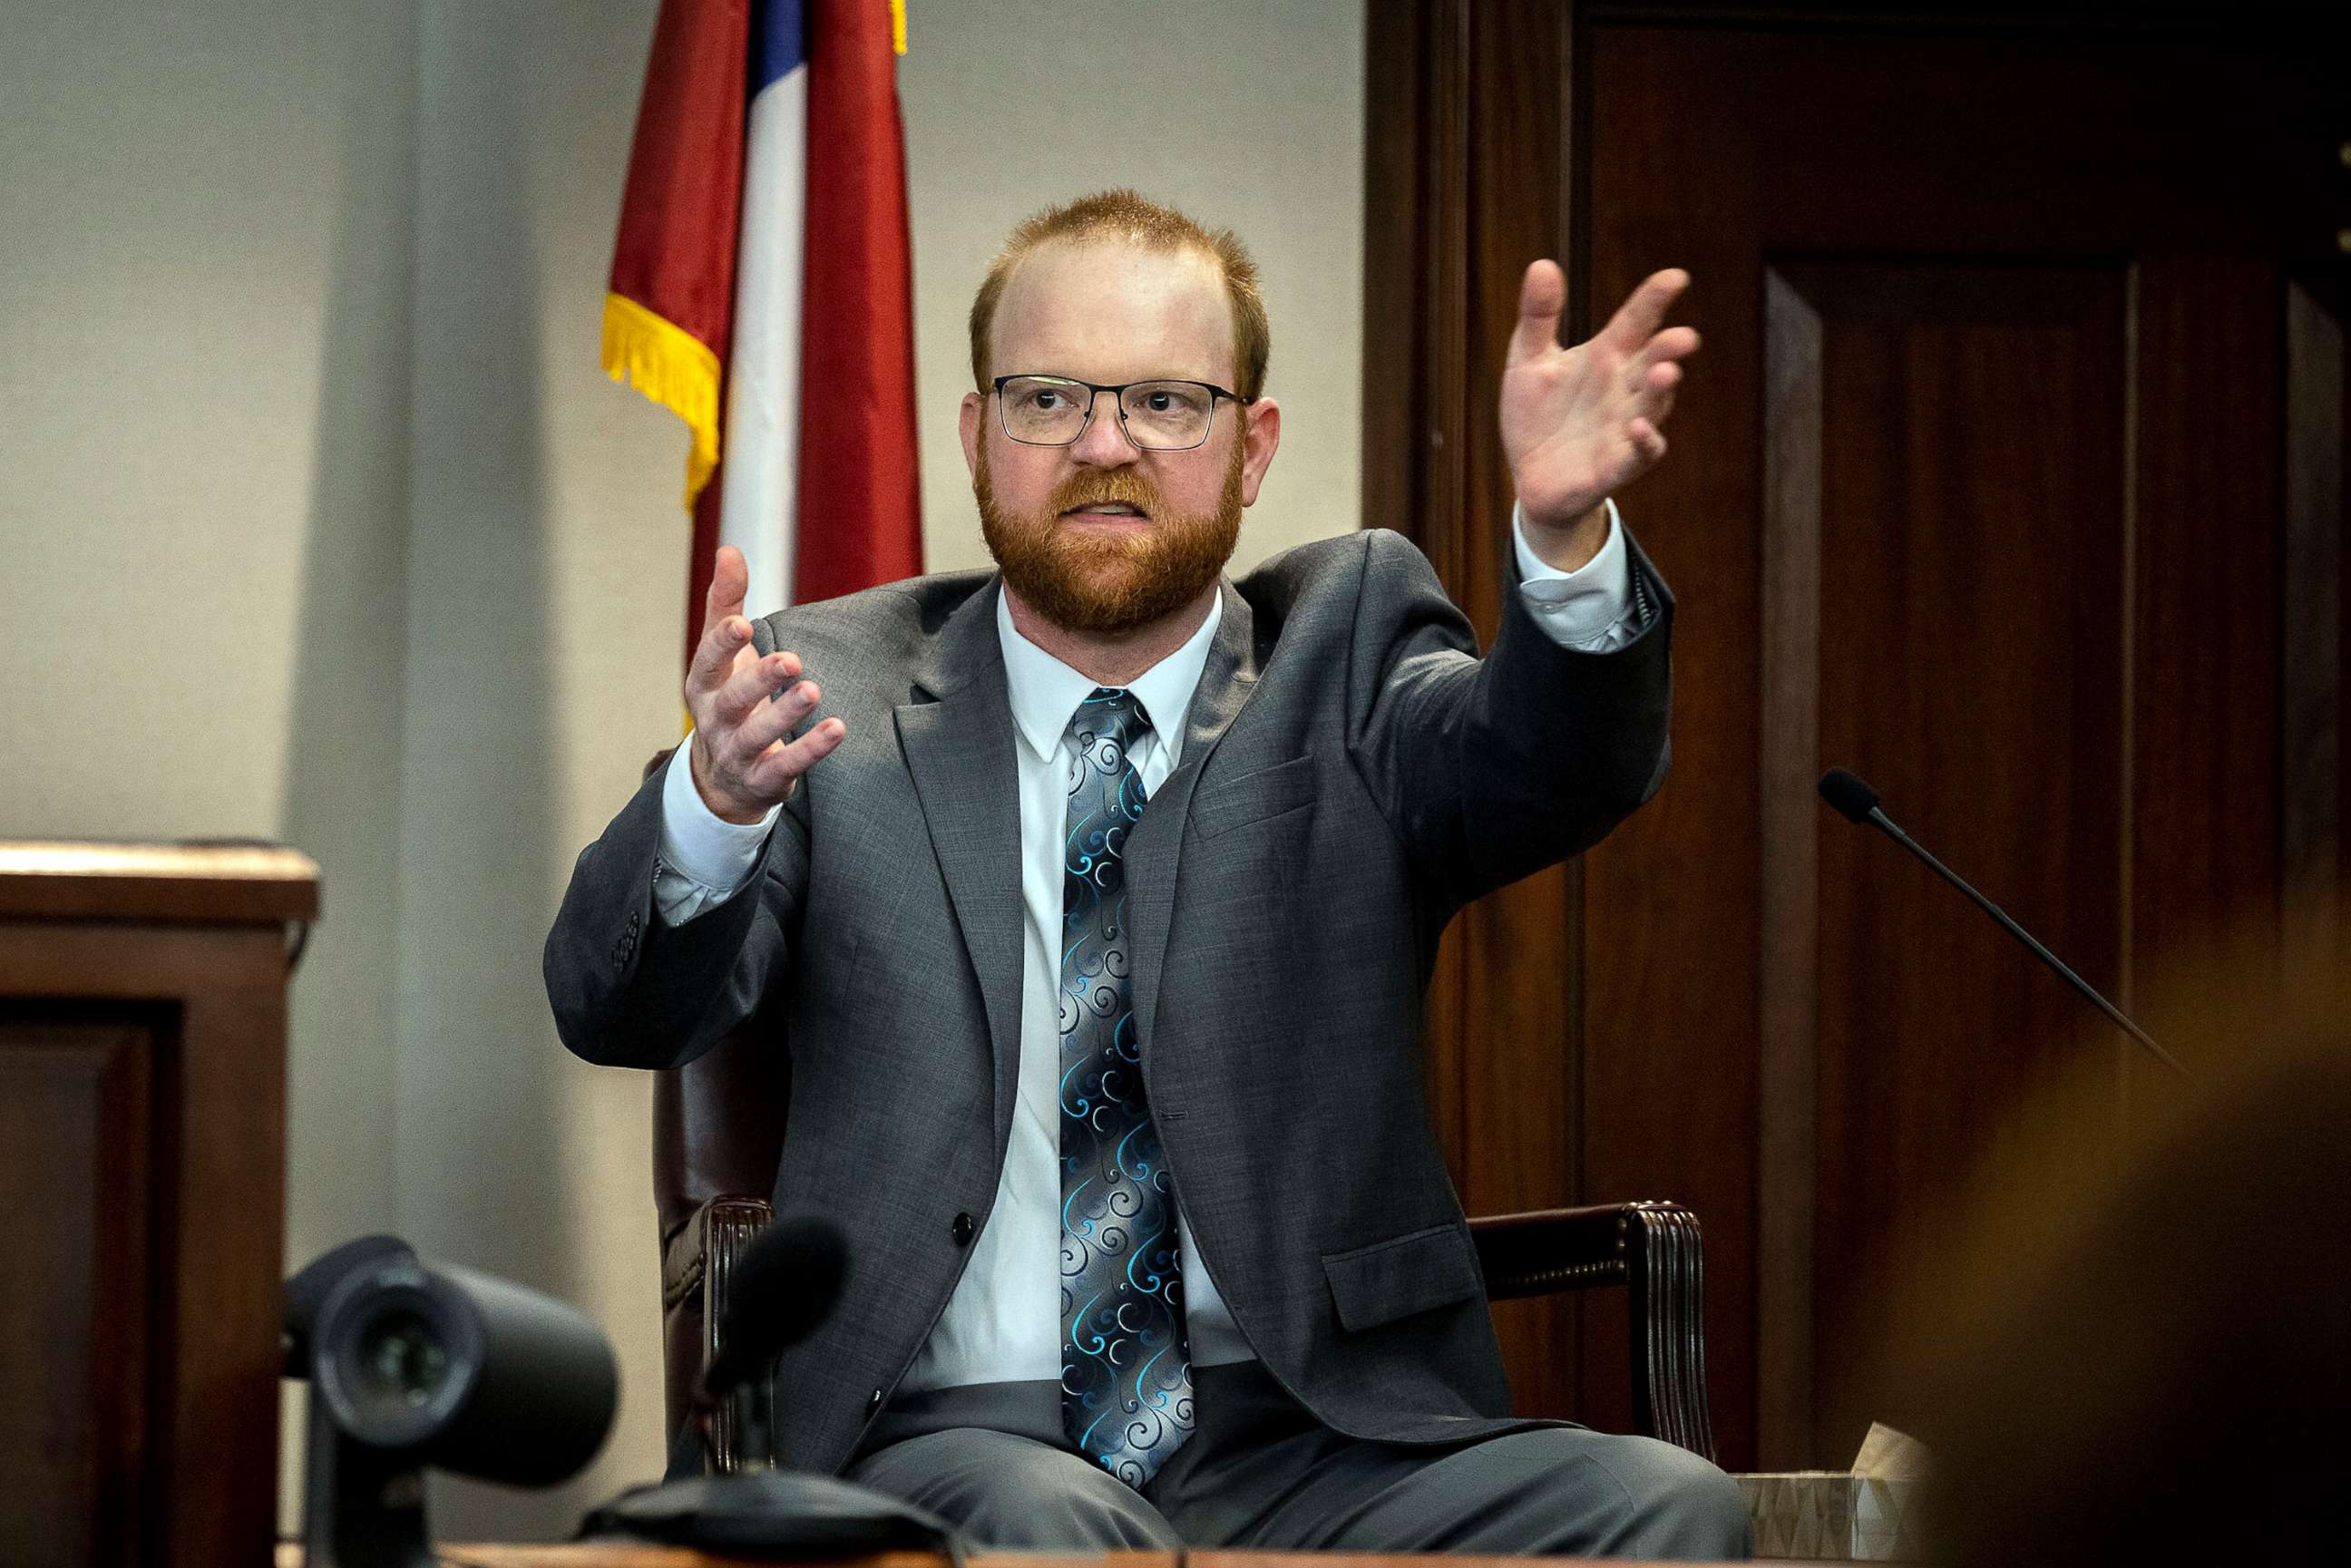 PHOTO: In this Nov. 17, 2021, file photo, Travis McMichael speaks from the witness stand during his trial at the Glynn County Courthouse in Brunswick, Ga.